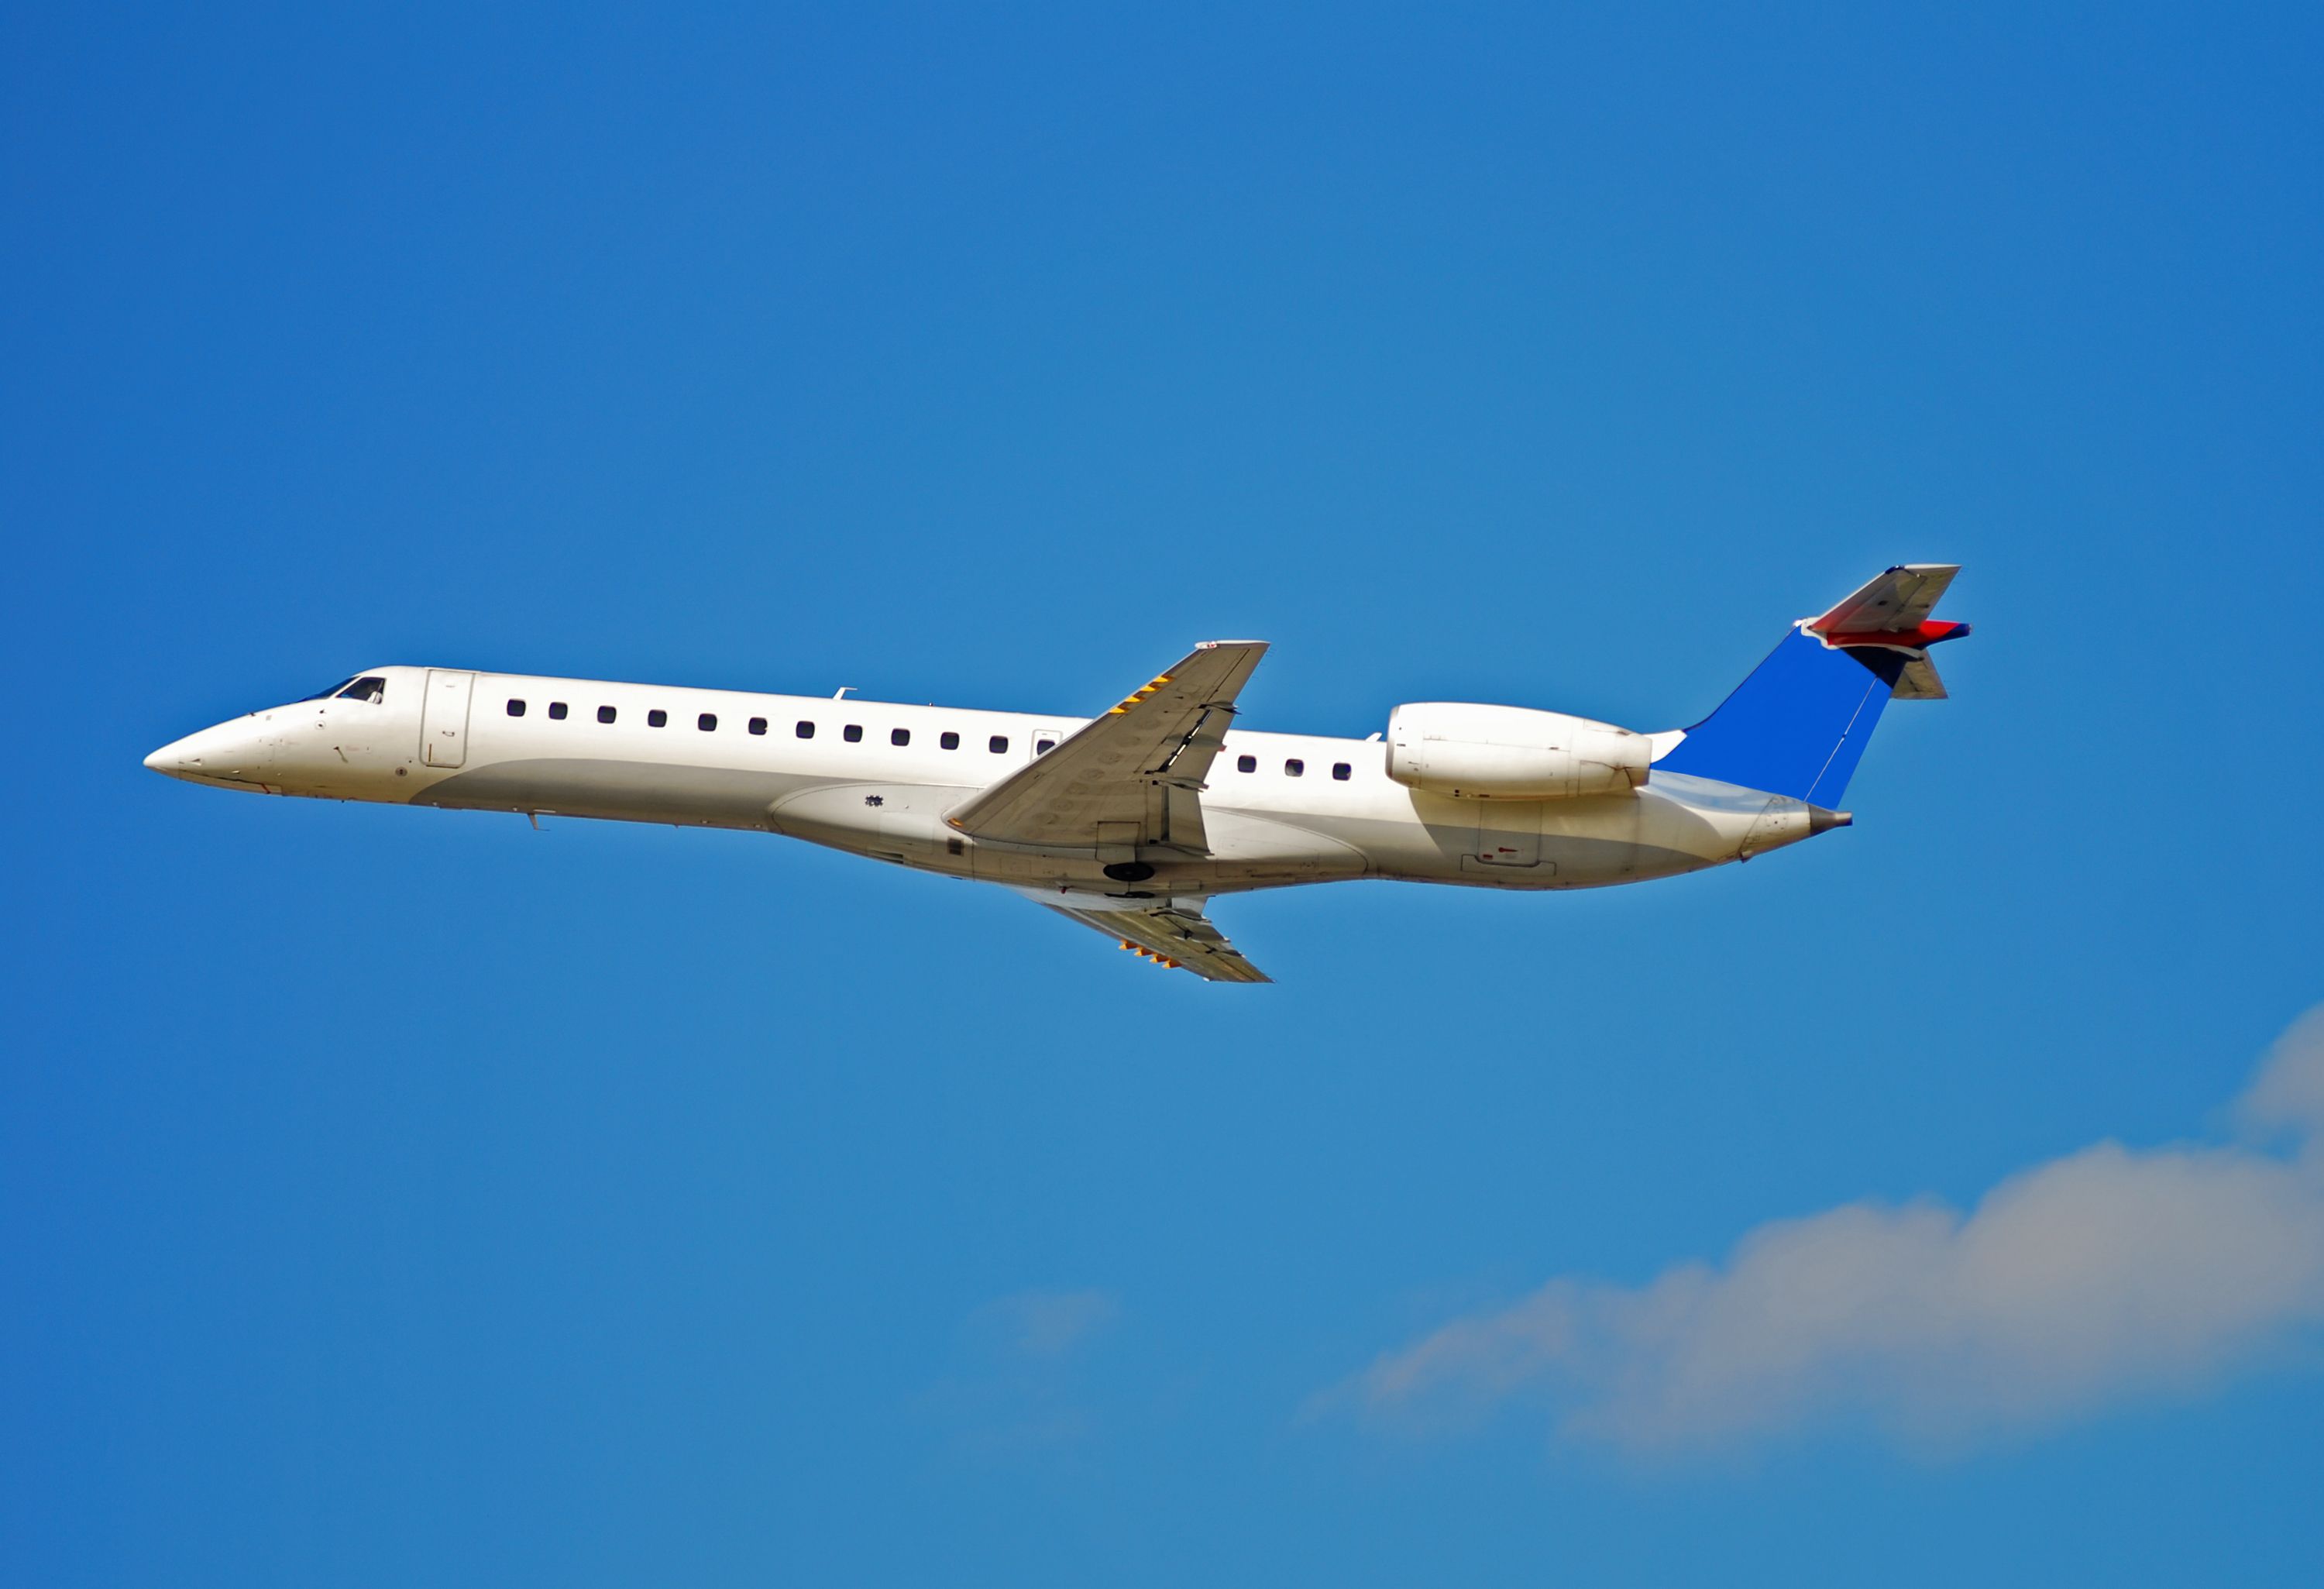 An Embraer regional jet flying in the sky.